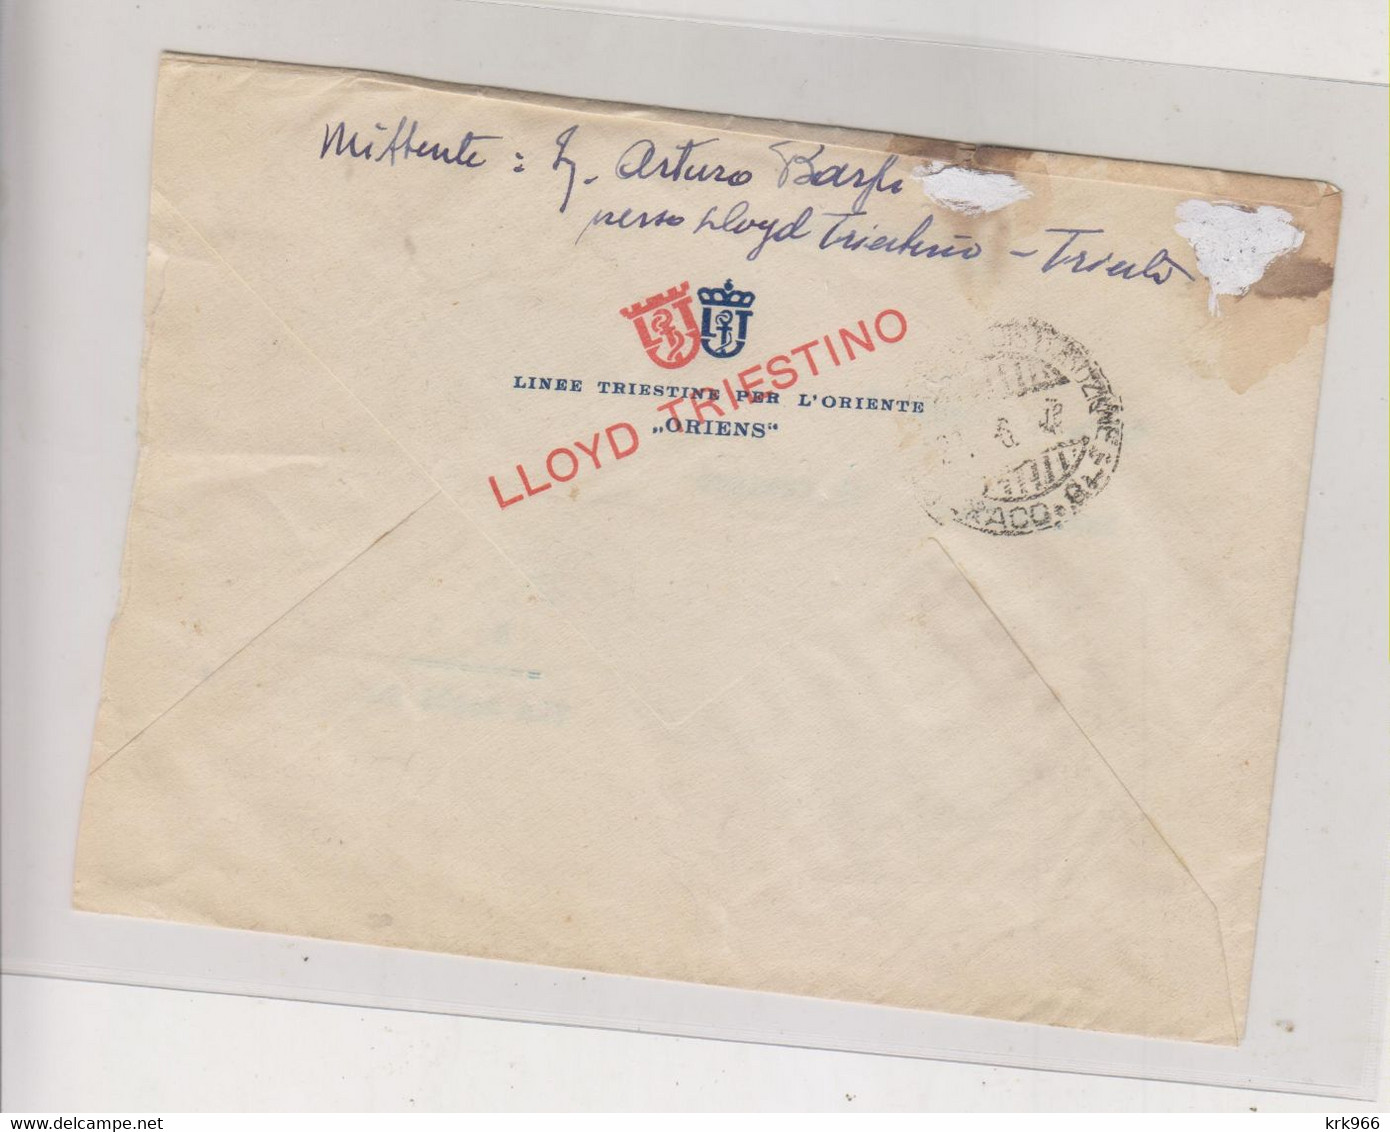 ITALY TRIESTE A 1947  AMG-VG Nice Registered  Cover - Marcofilie